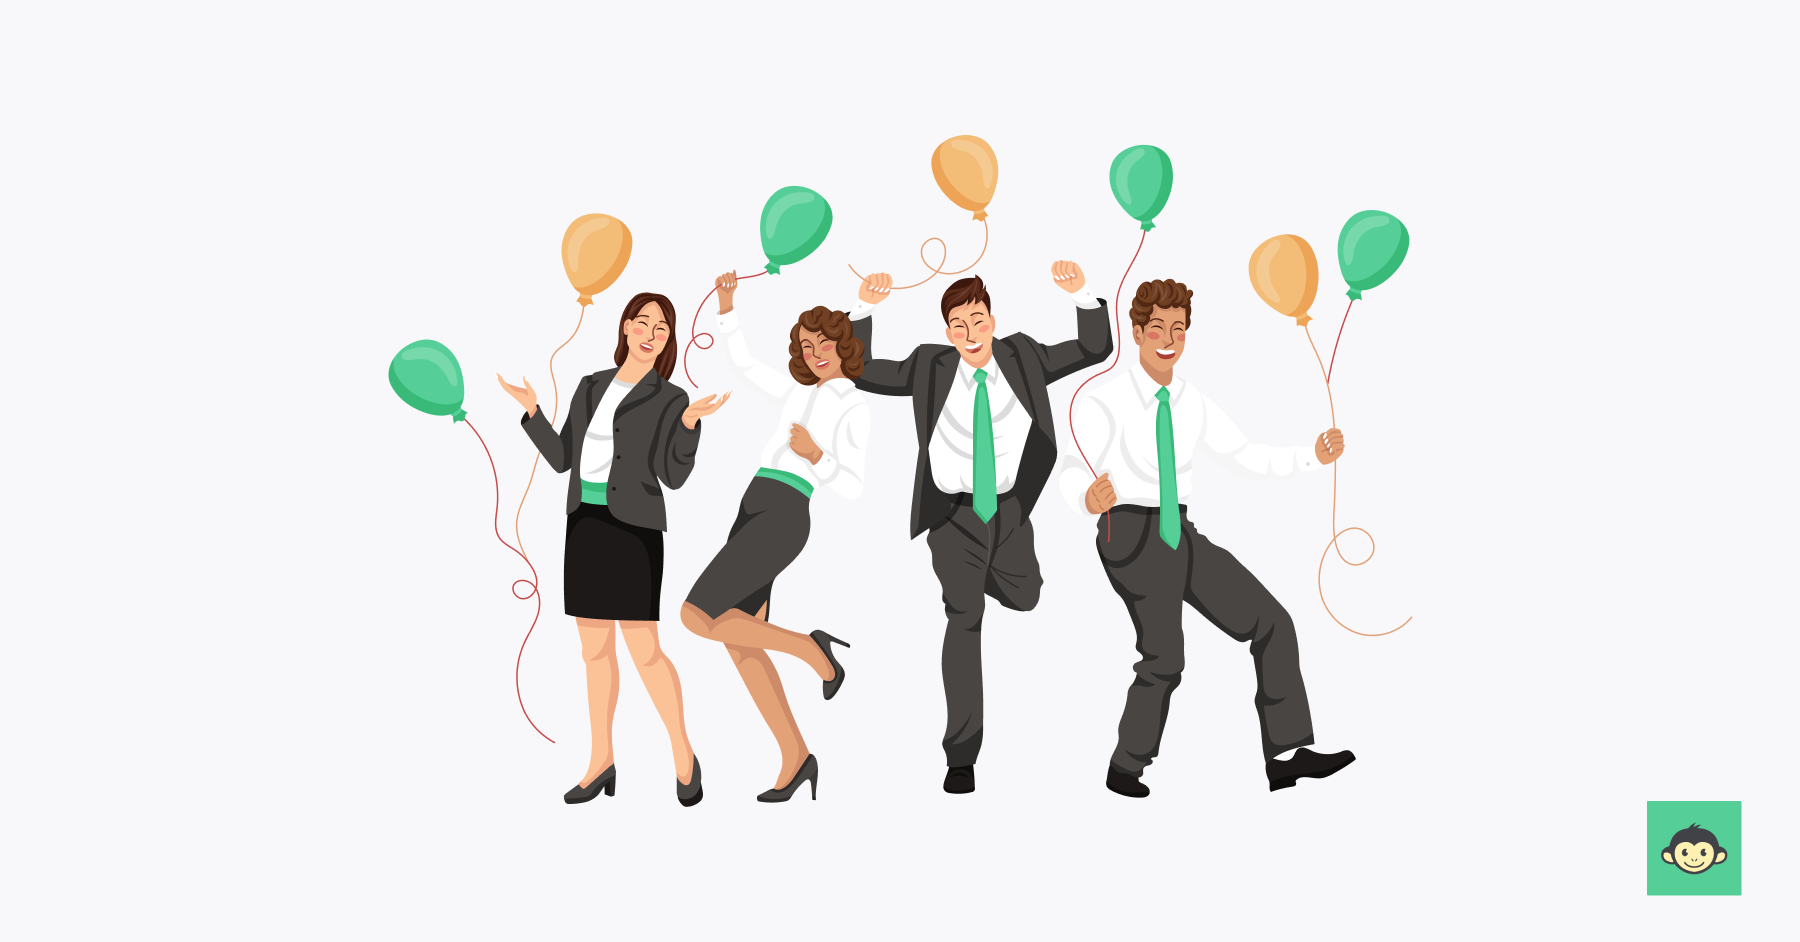 Four employees are celebrating work anniversary by dancing and holding balloons 